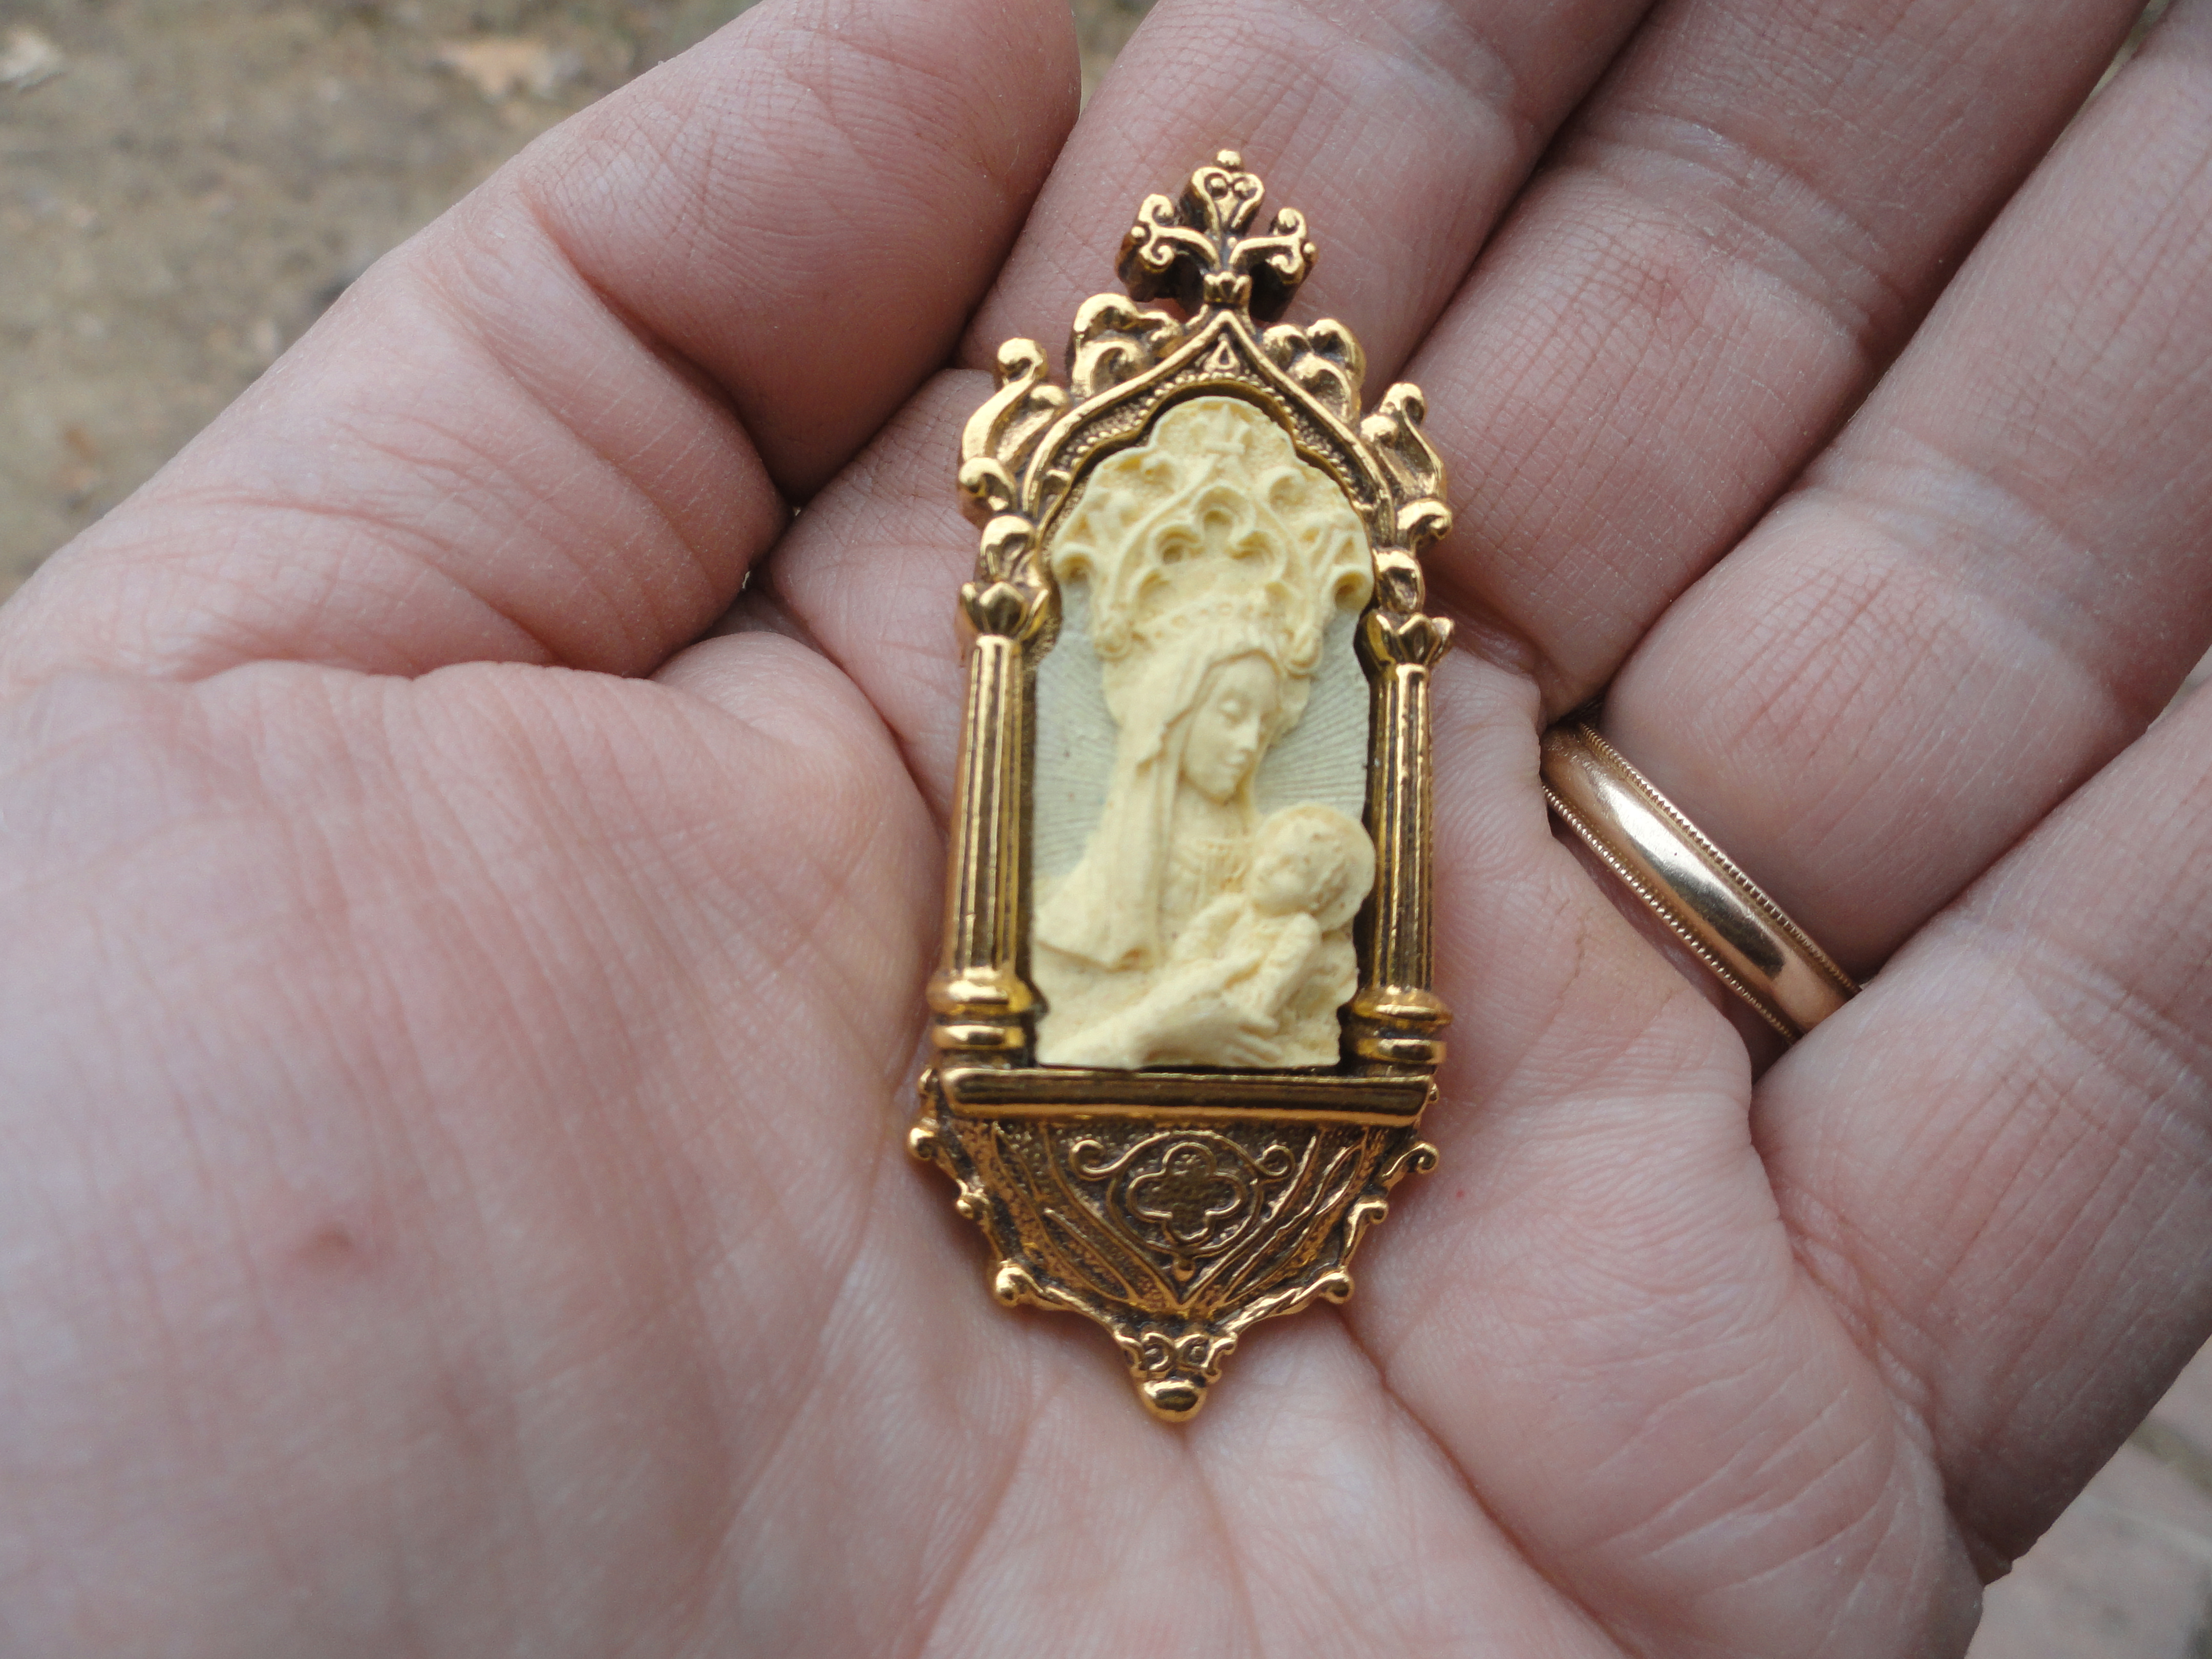 reproduction of Madonna and Child in an ornate metal frame, in the palm of a hand